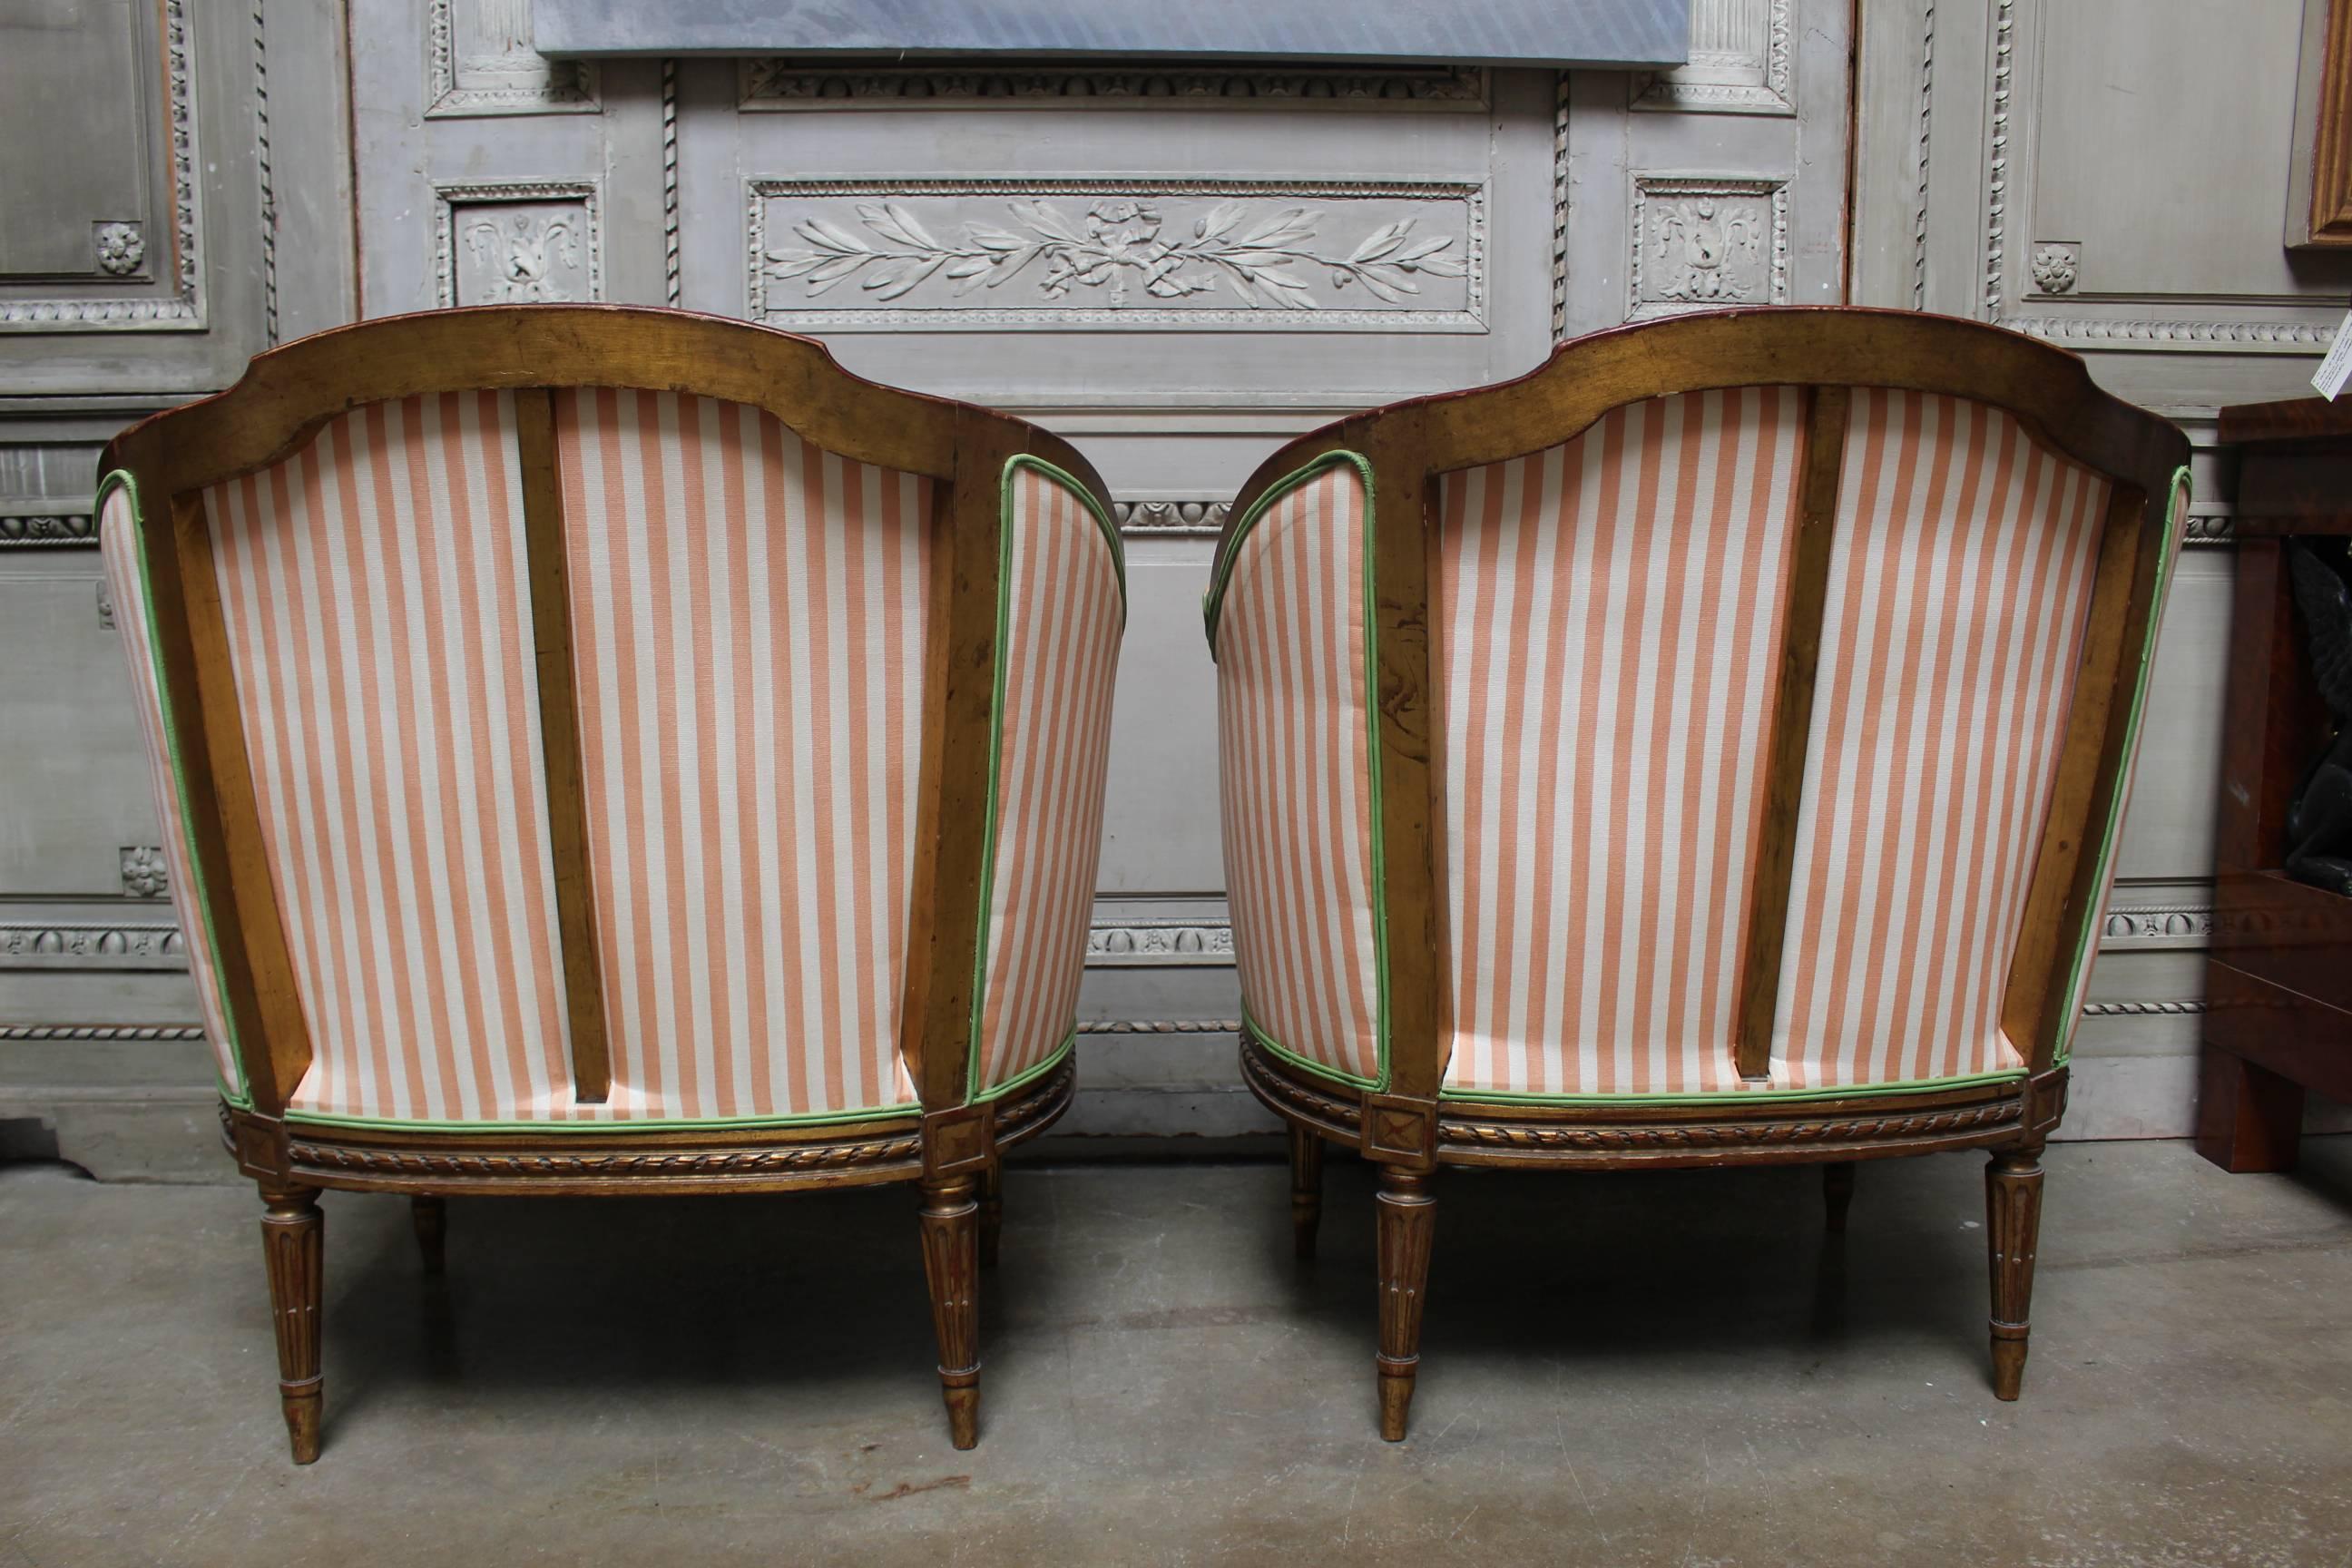 Pair of 19th Century French Louis XVI Style Armchairs with a Gold Leaf Finish In Good Condition For Sale In Dallas, TX